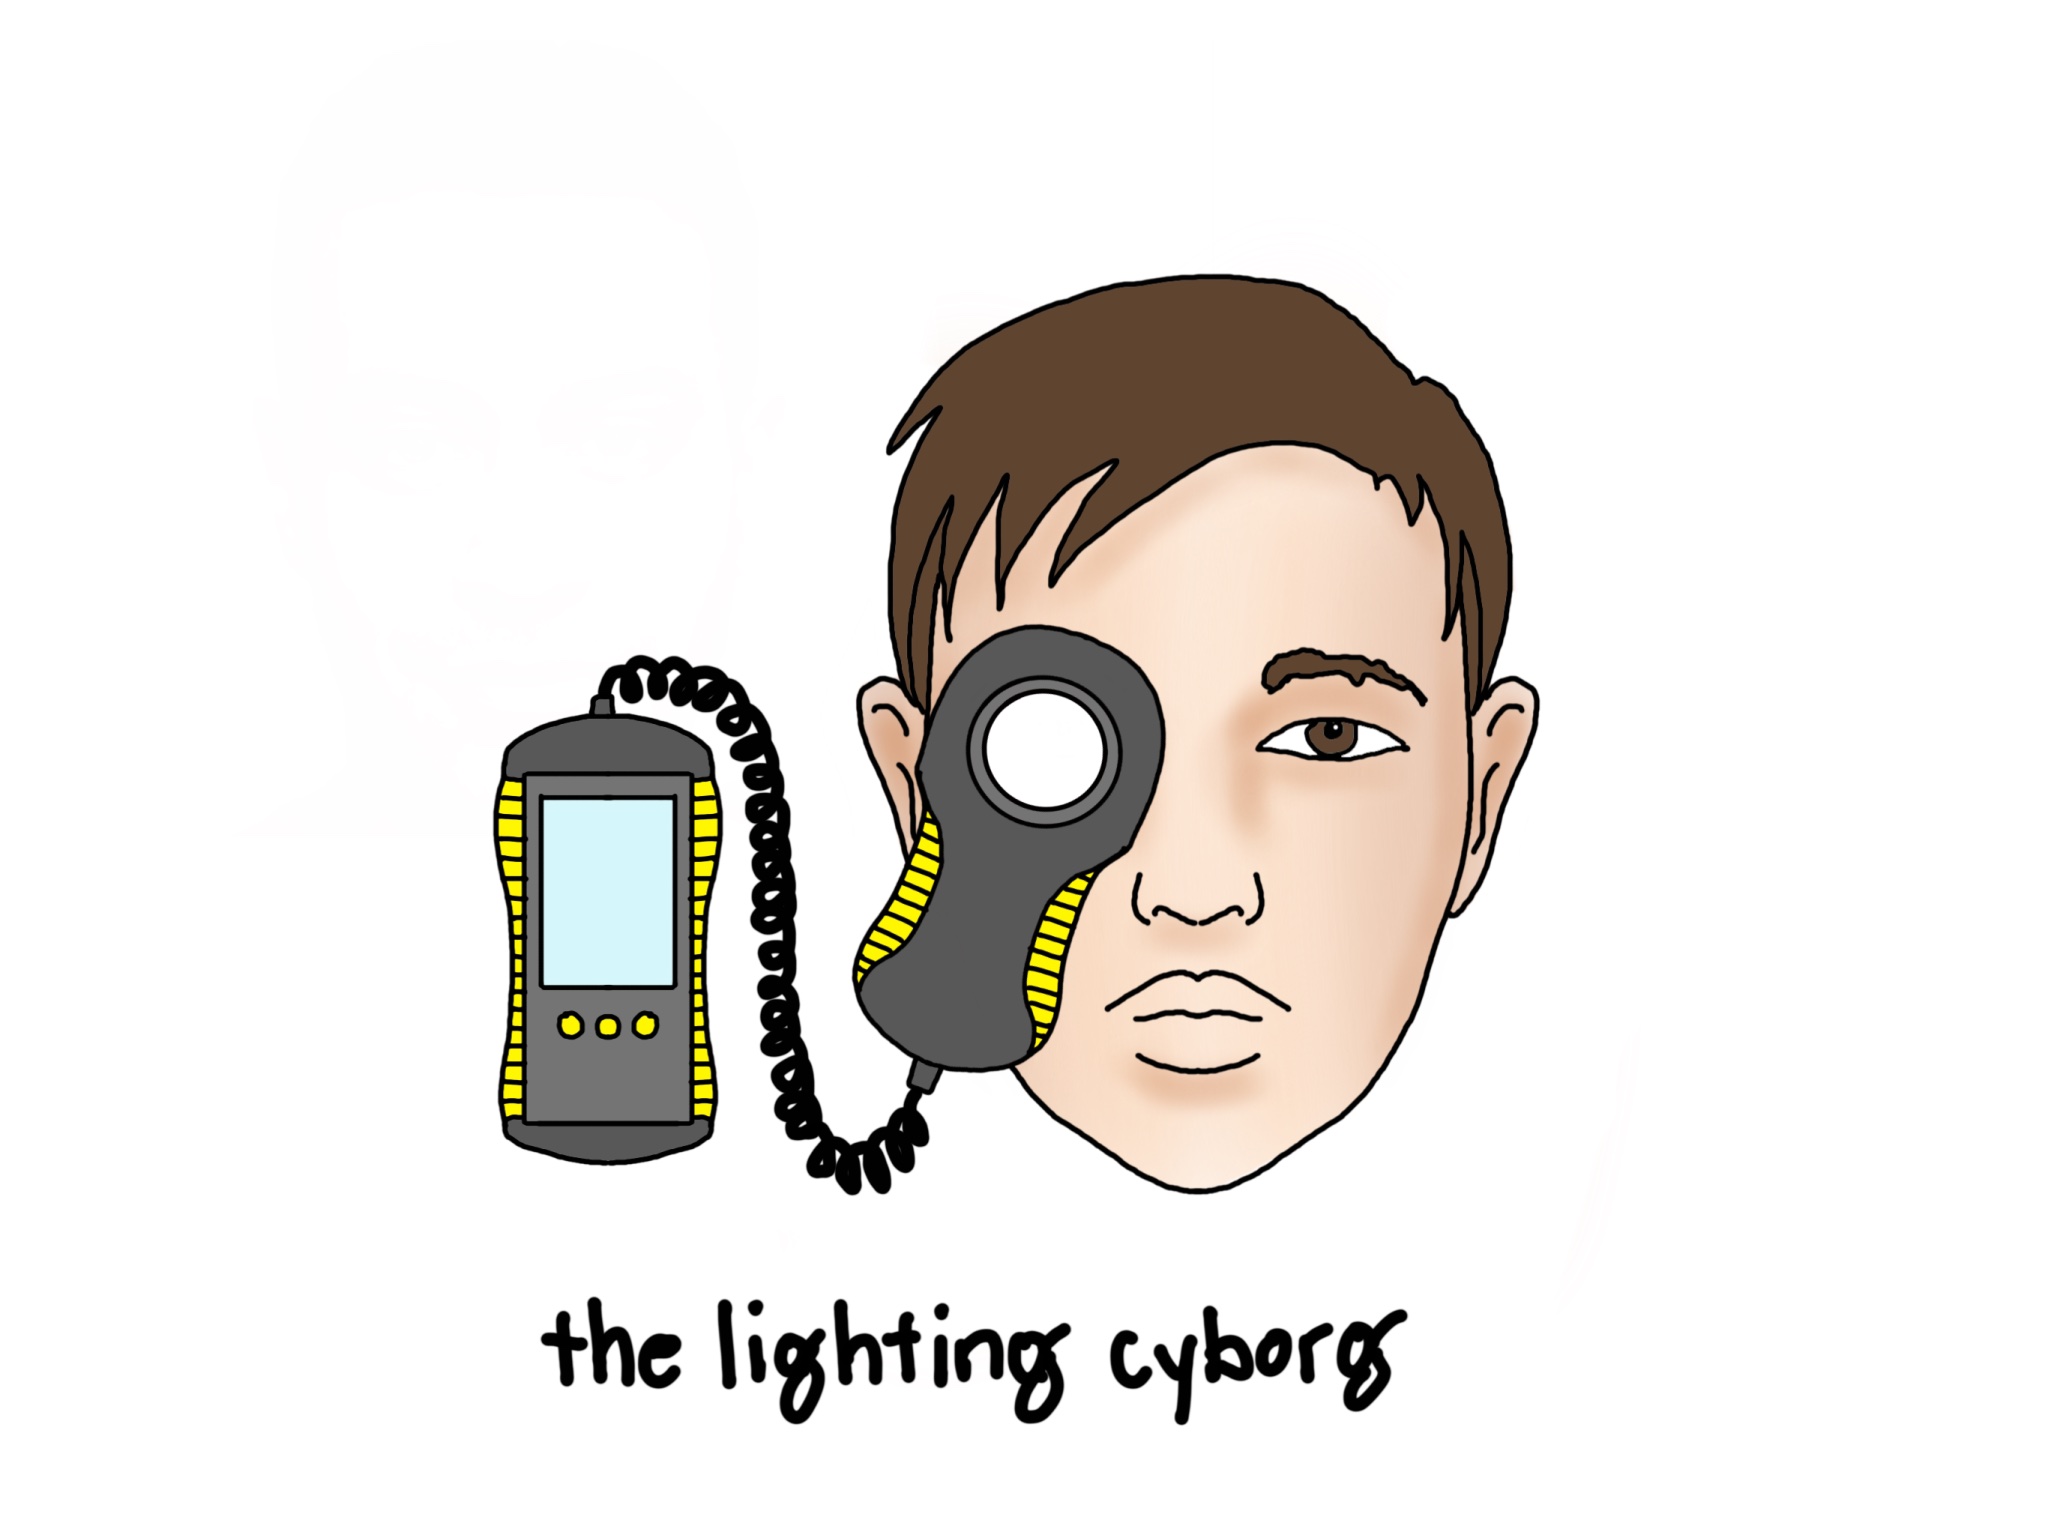 An illustration of the head of a white man with brown hair. One of his eyes is replaced by a reader from a light reader, a cord connects to the meter. Script below the head reads "the lighting cyborg"